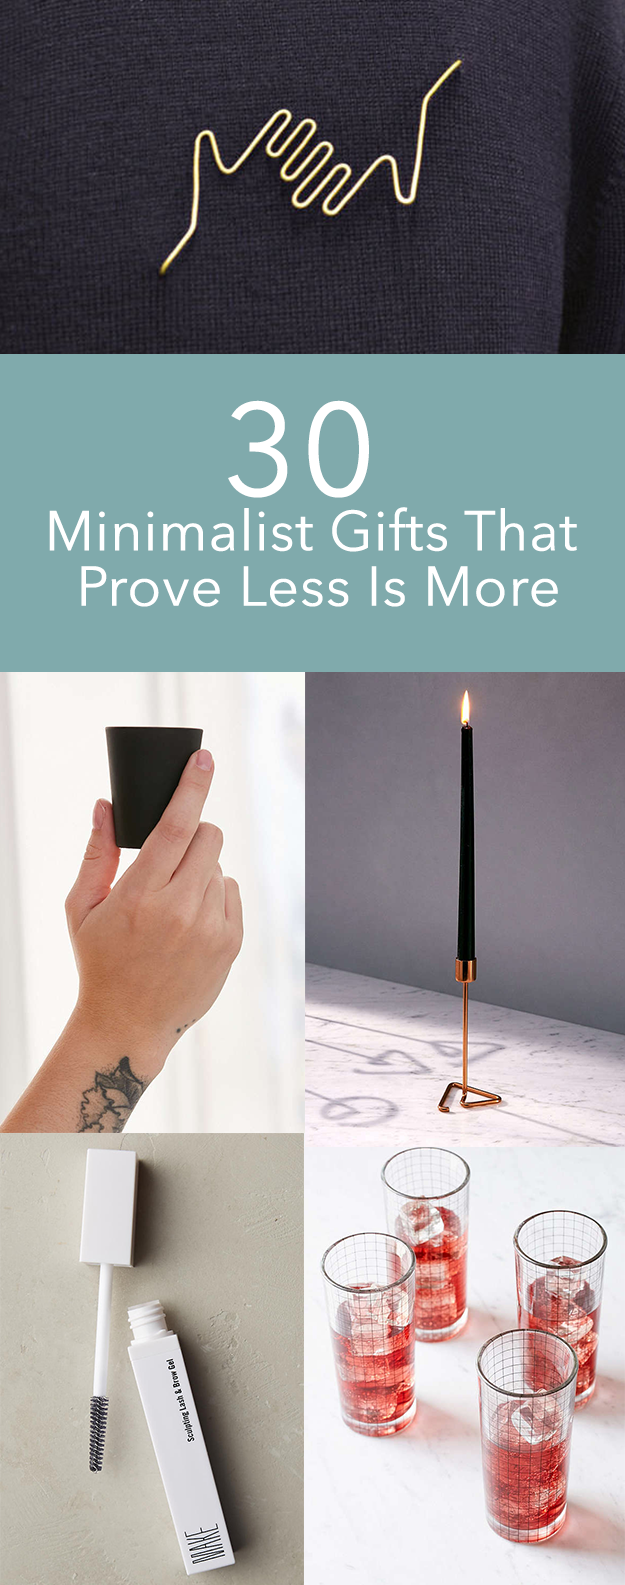 29 Elegant Gifts For The Minimalist In Your Life